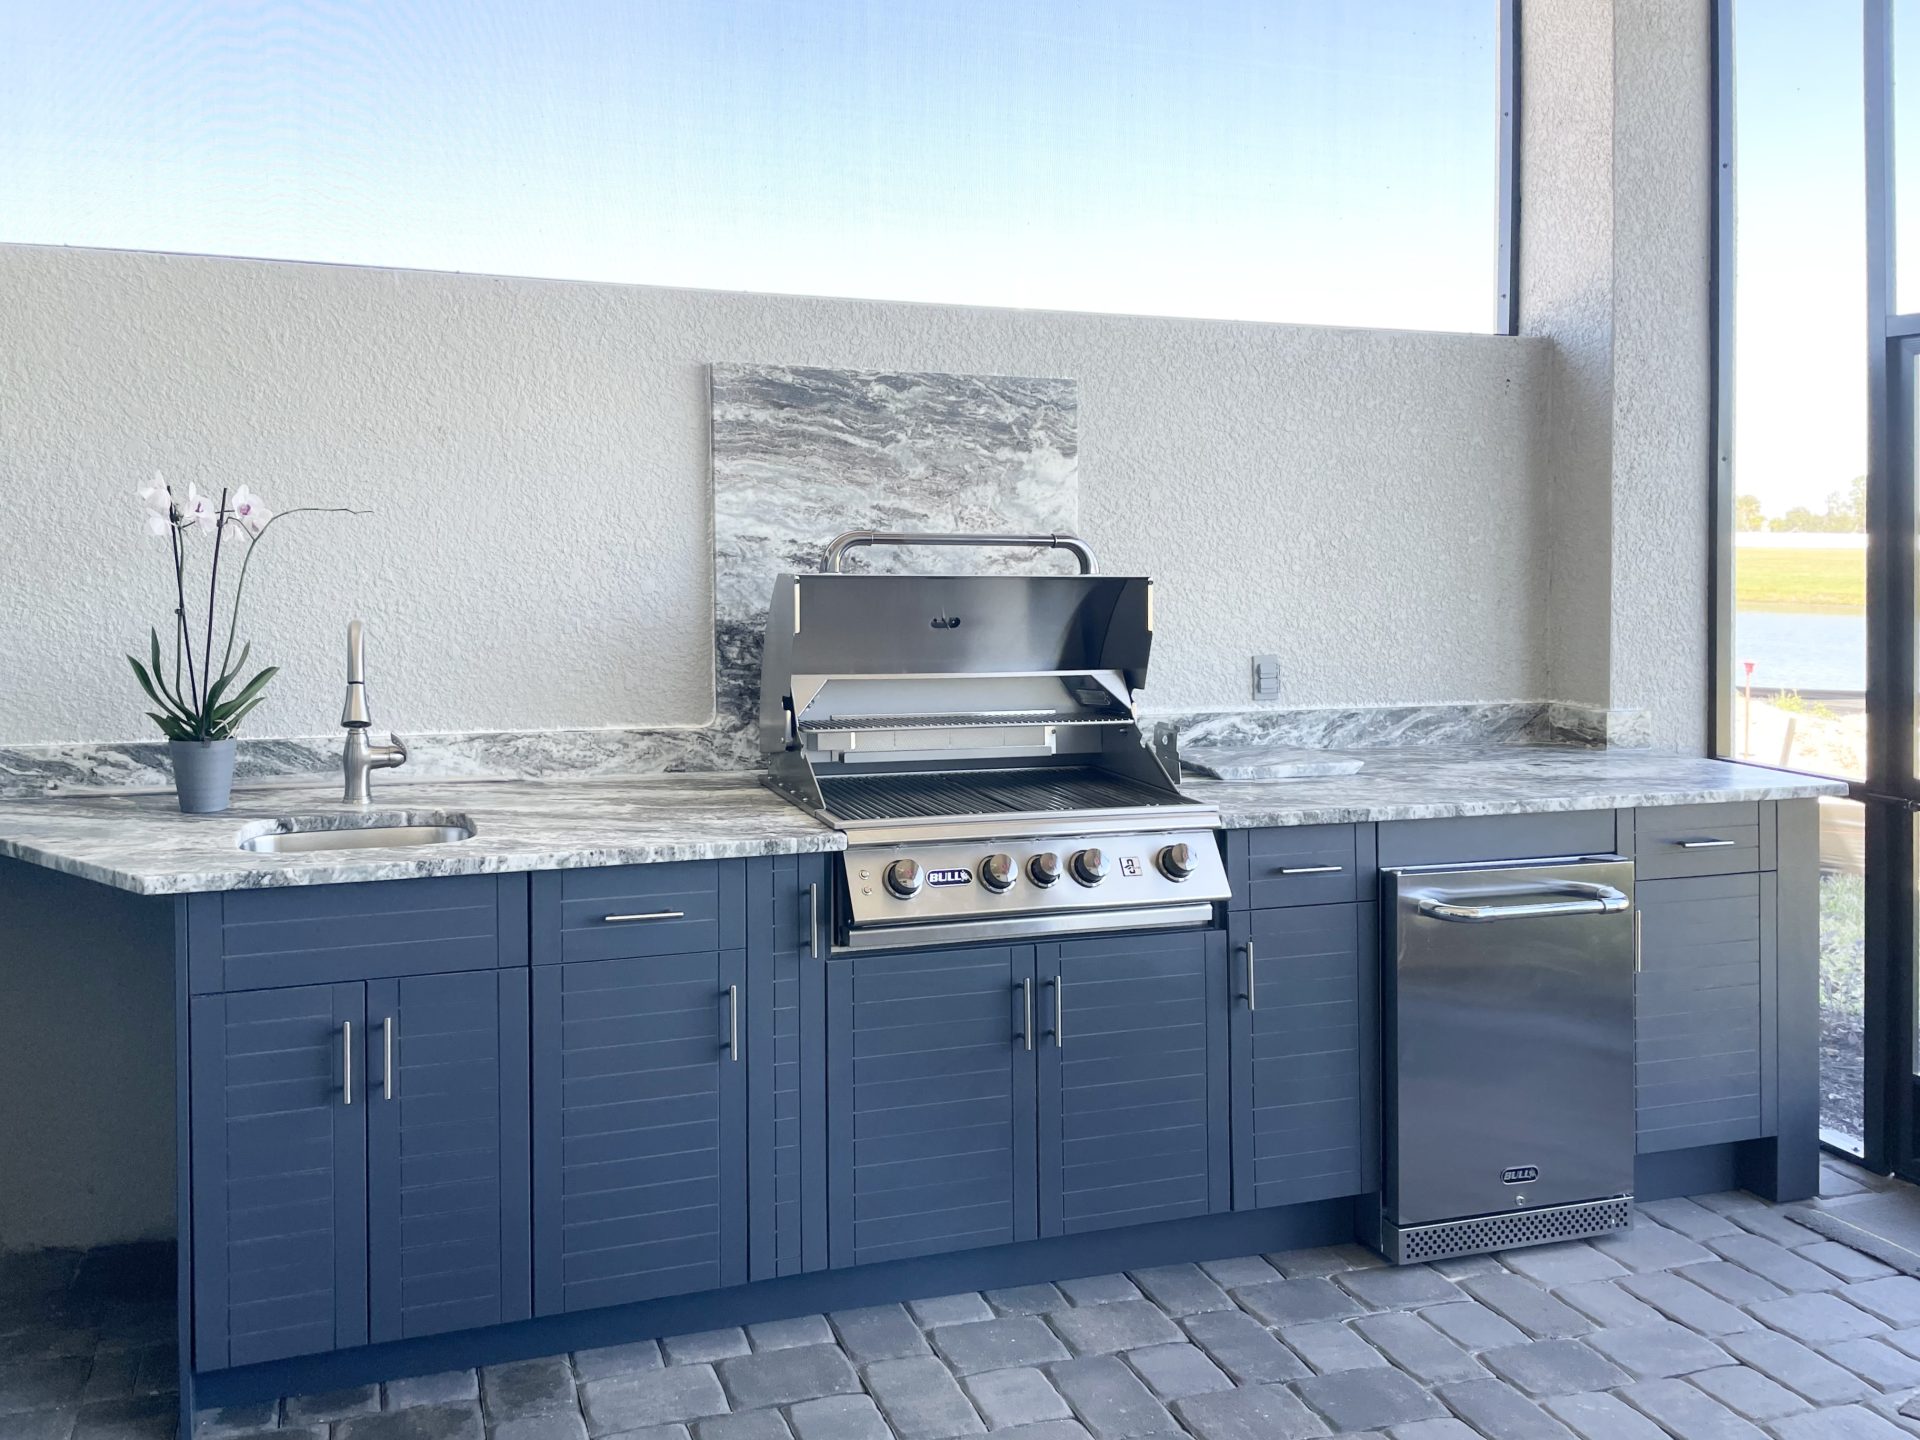 OUTDOOR KITCHEN 8. Custom outdoor kitchen in Palmetto, FL. Kitchen features charcoal grey, cabana style cabinets. Appliances include Bull grill, Bull stainless refrigerator and stainless bar pulls.